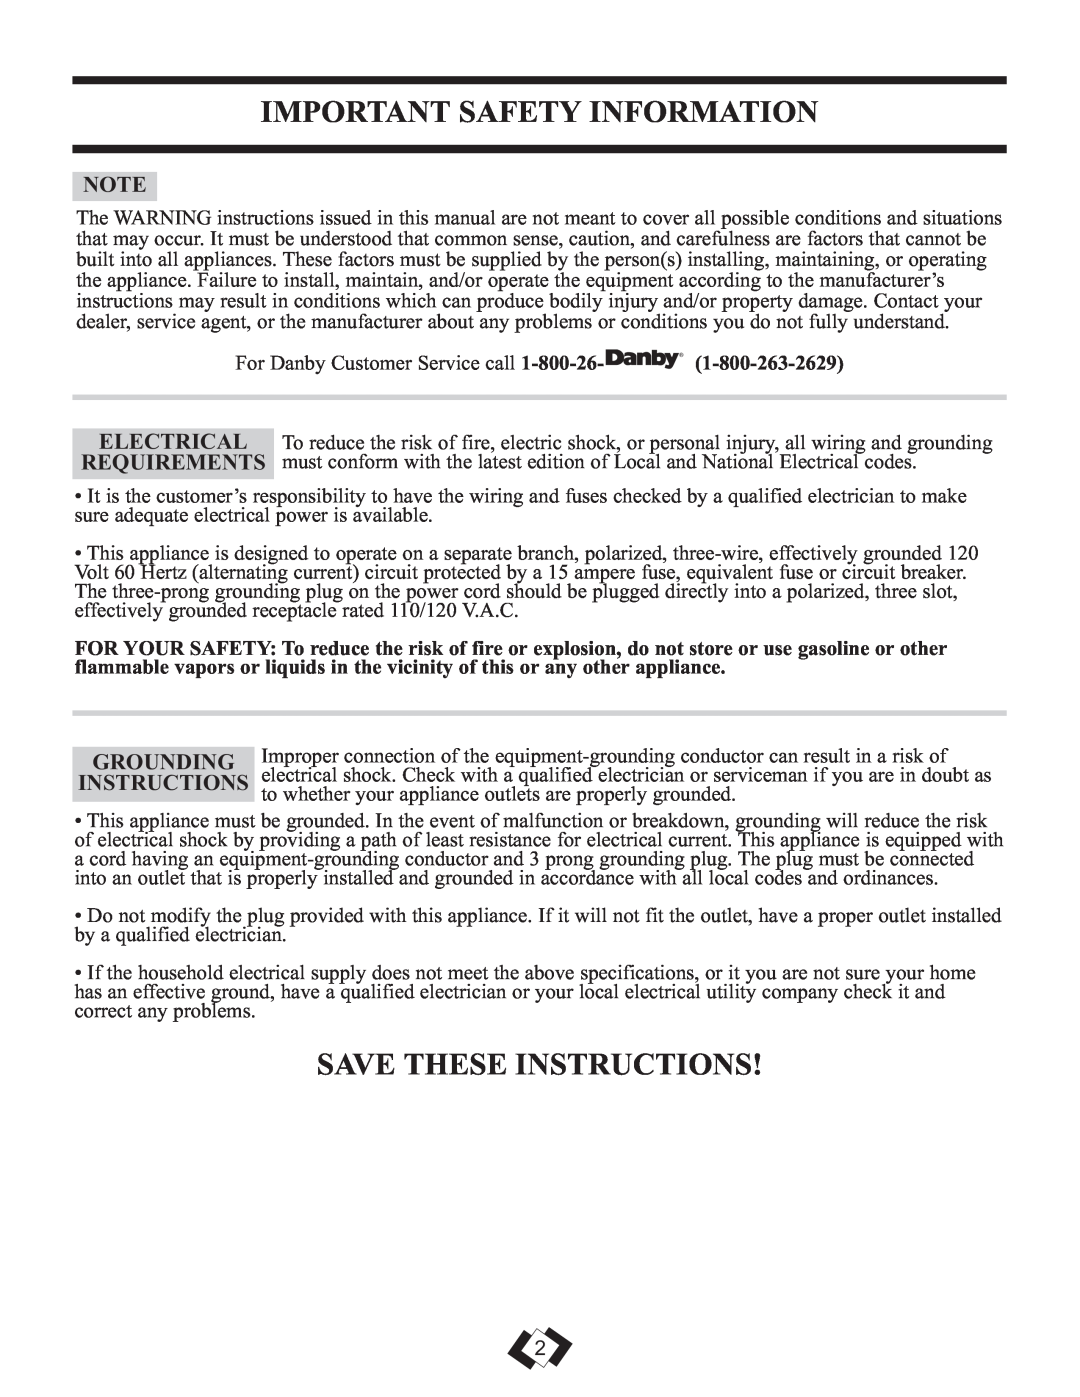 Danby 7009REE, 6009REE operating instructions Important Safety Information, Save These Instructions, Grounding 